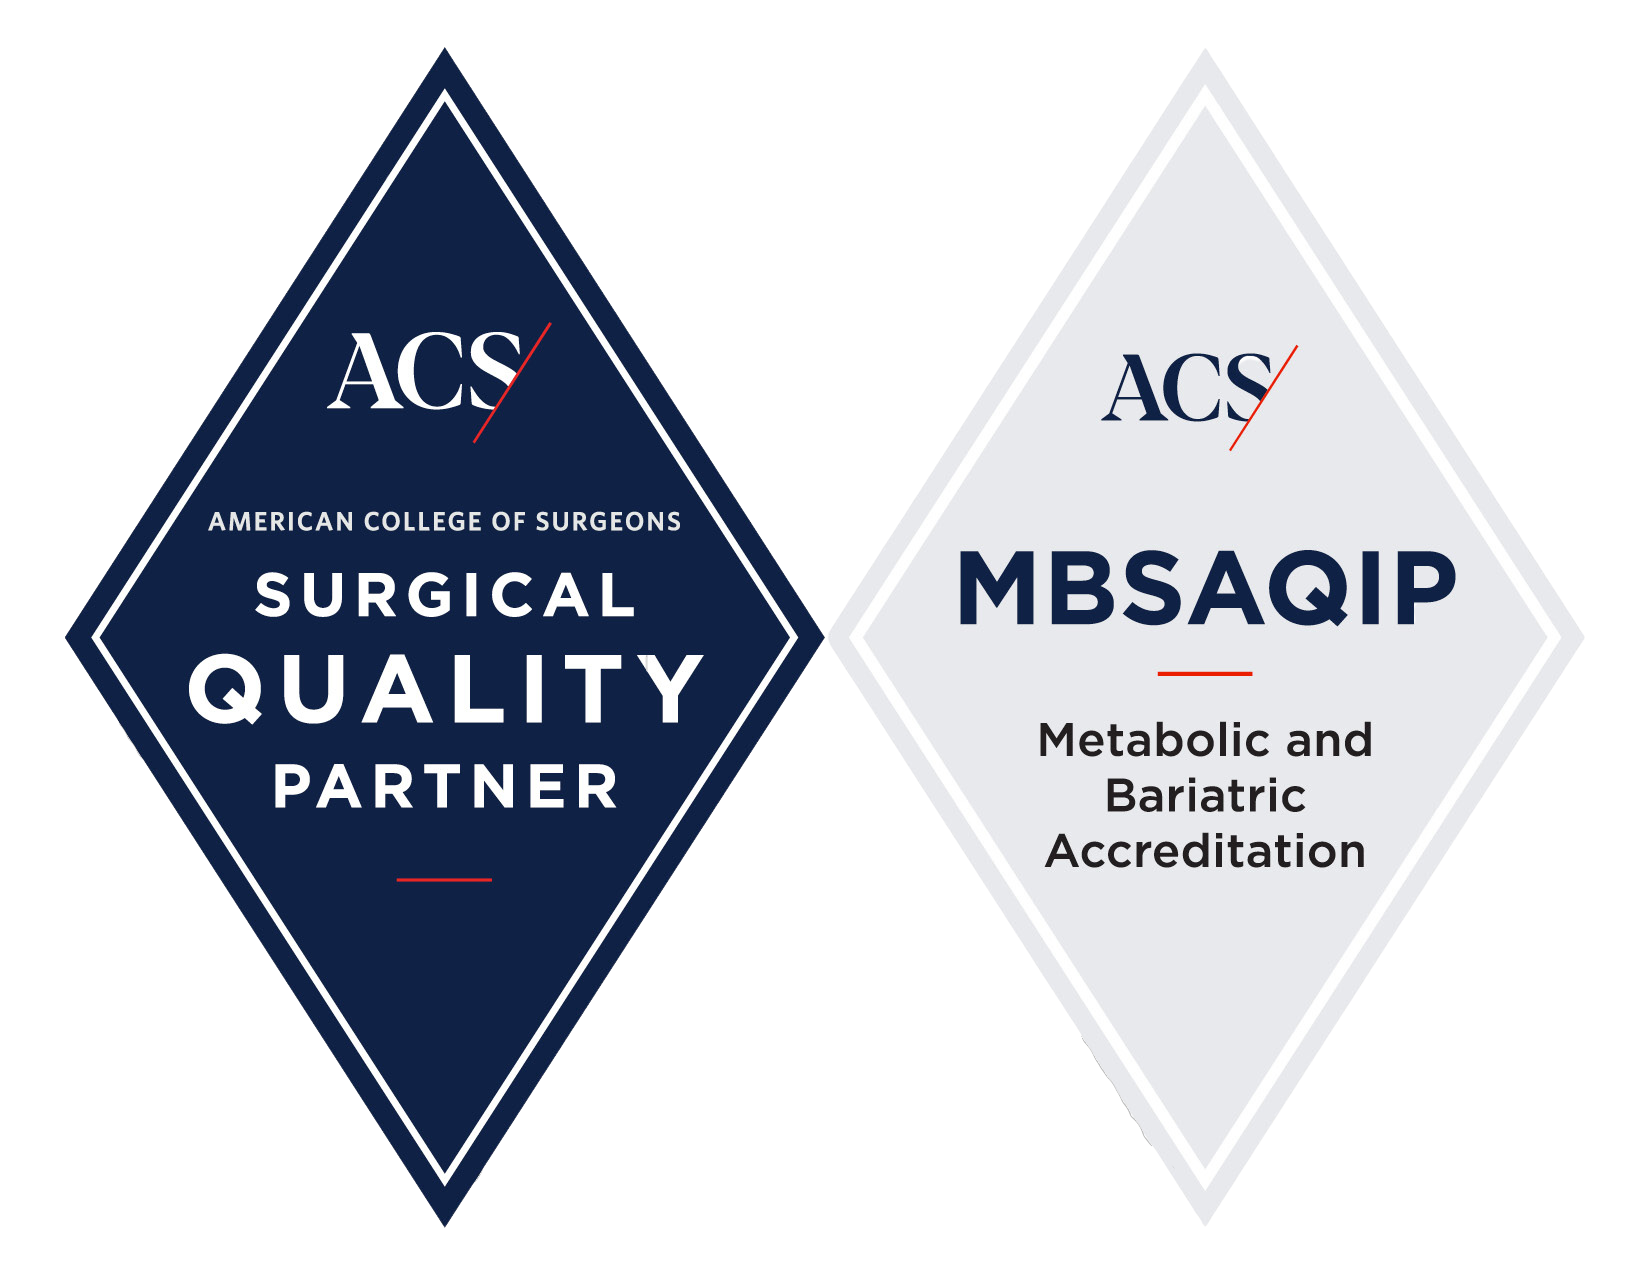 ACS Surgical Quality Partner for Metabolic and Bariatric Surgery